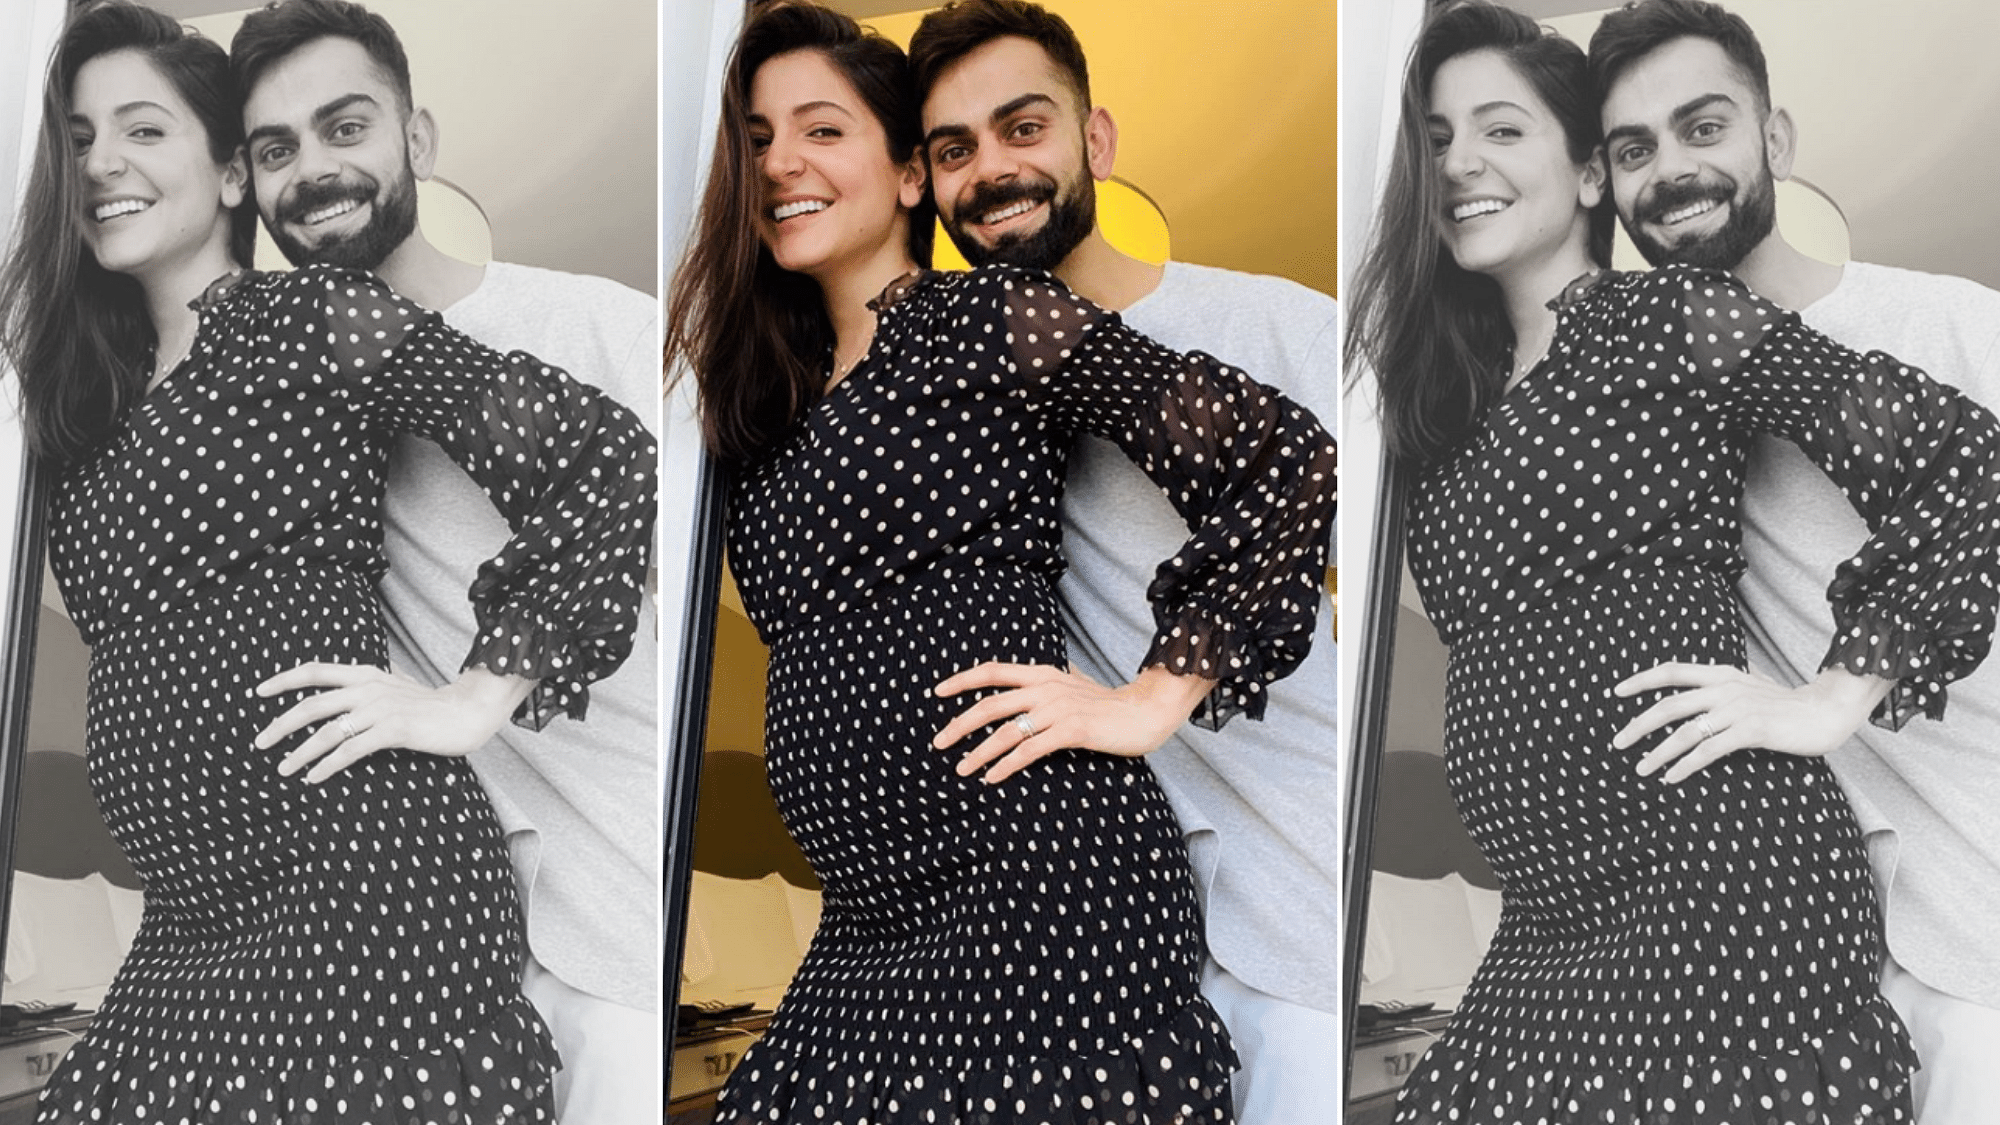 Virat Kohli and Anushka Sharma are expecting their first child in January, 2021.